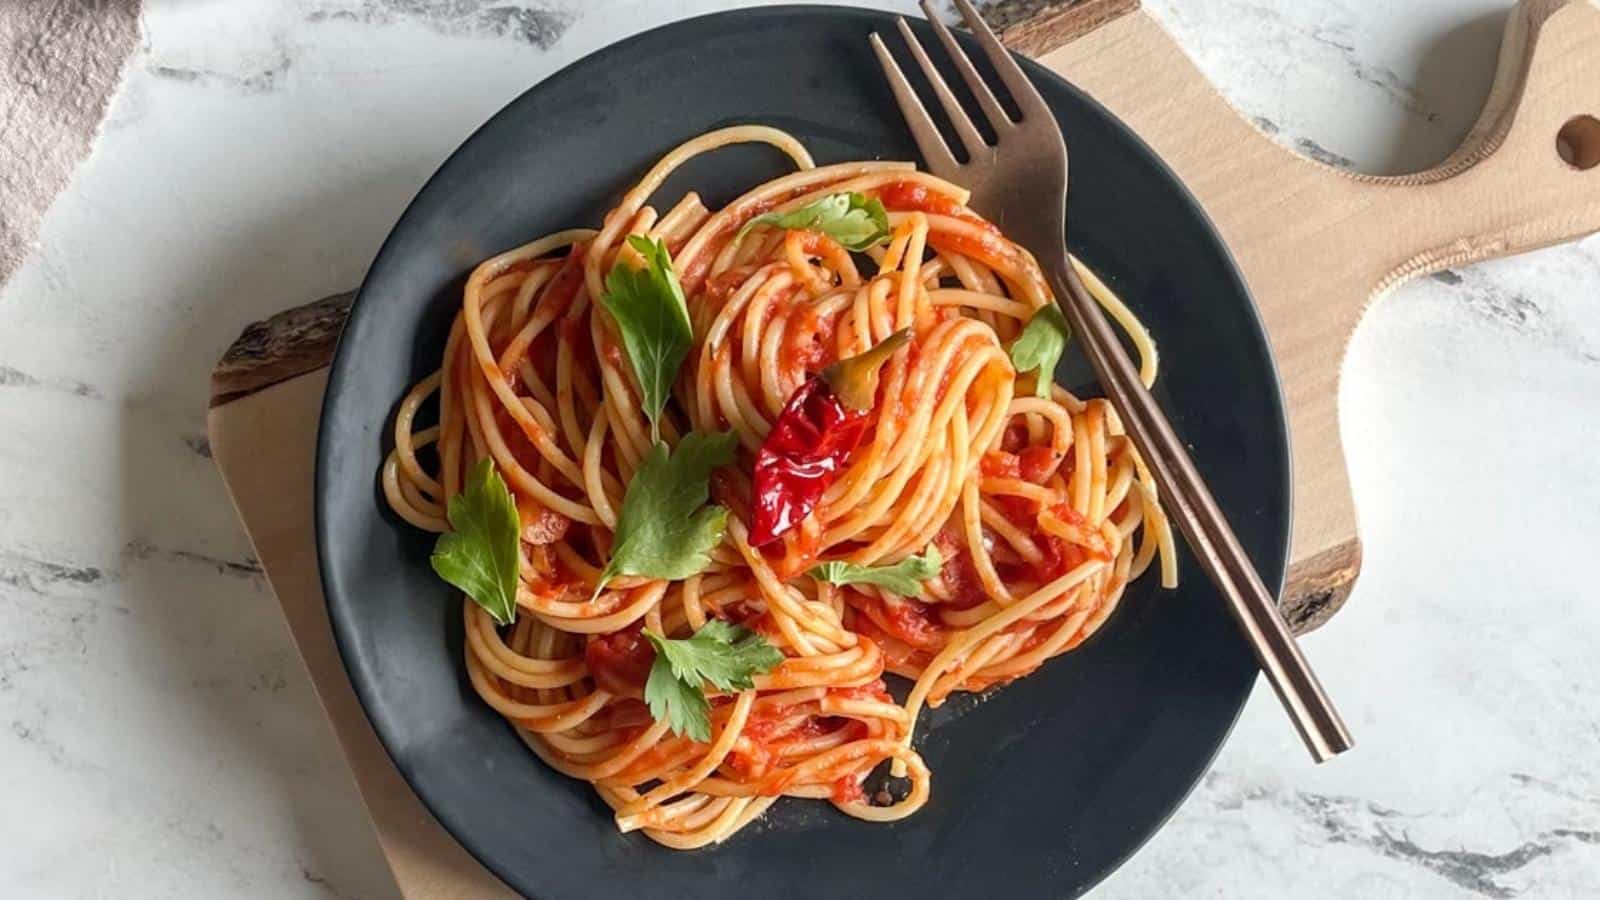 Spaghetti Arrabbiata is twirled on a black plate on a white marble counter.